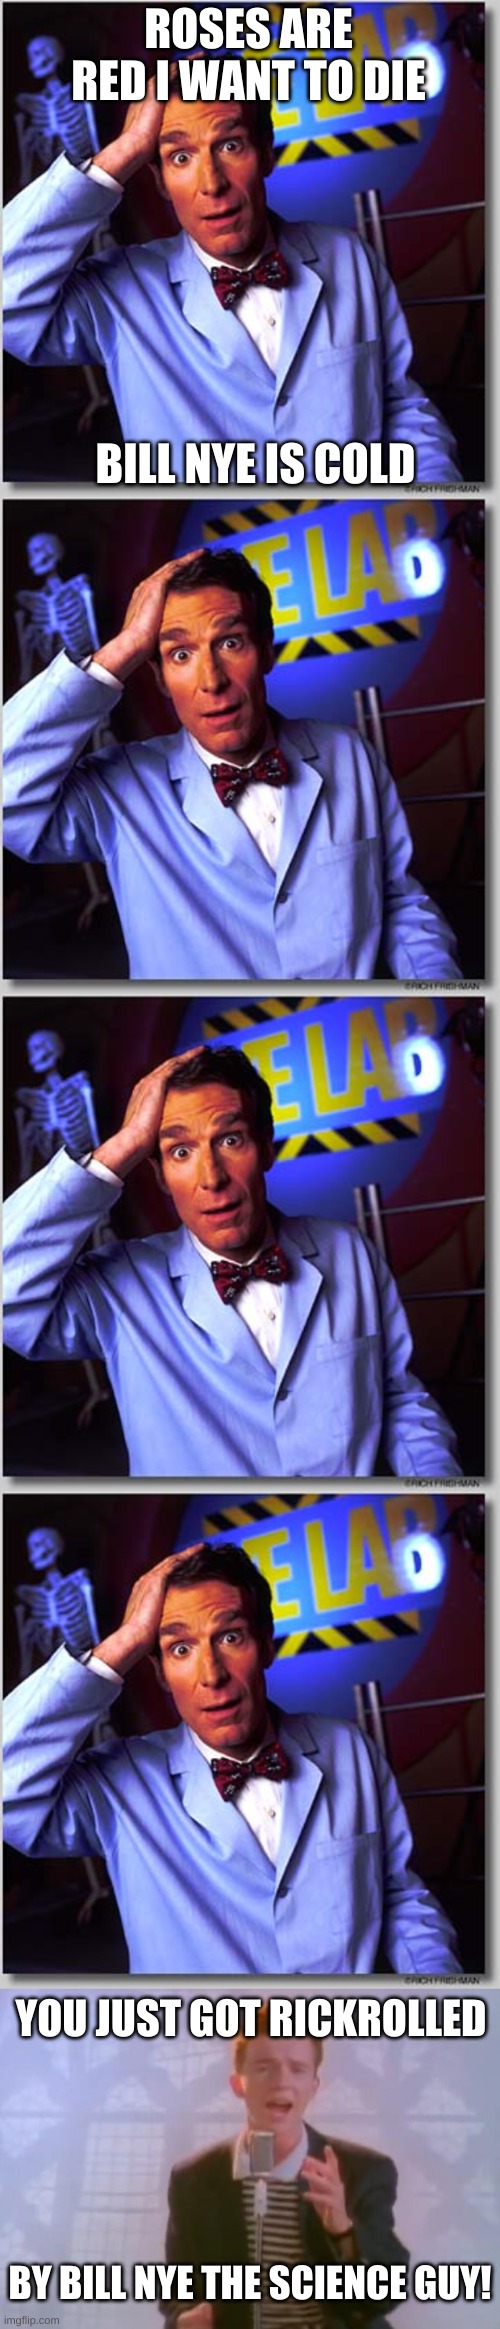 lol :) | ROSES ARE RED I WANT TO DIE; BILL NYE IS COLD; YOU JUST GOT RICKROLLED; BY BILL NYE THE SCIENCE GUY! | image tagged in memes,bill nye the science guy,rick astley | made w/ Imgflip meme maker